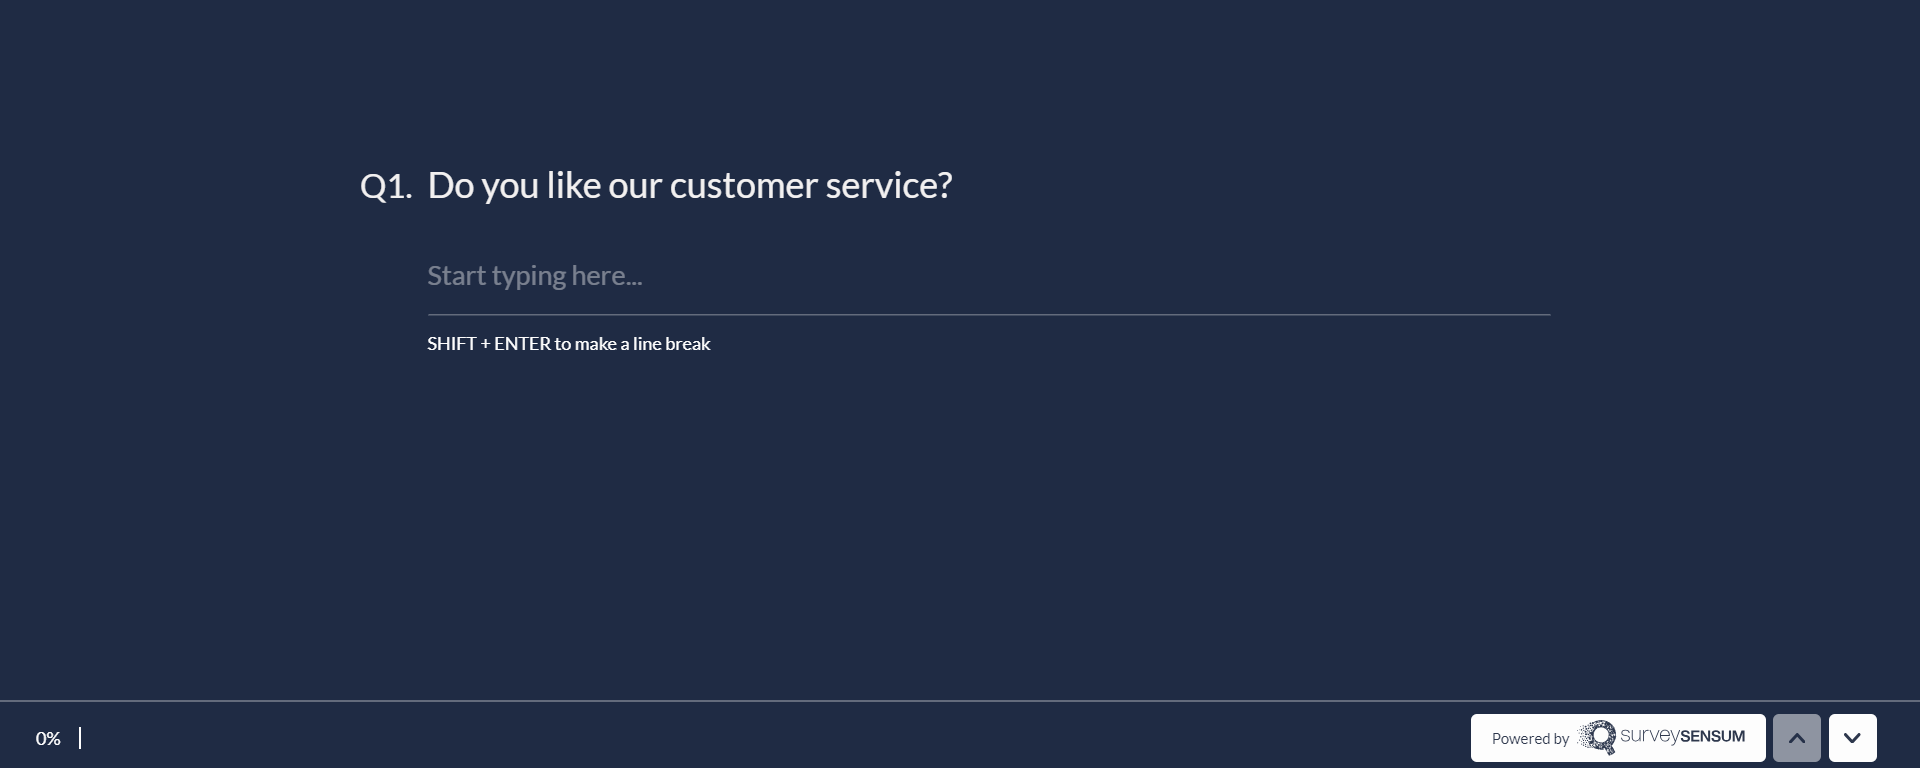  The image shows an example of a biased survey question where the customer is being asked - do you like our customer service?